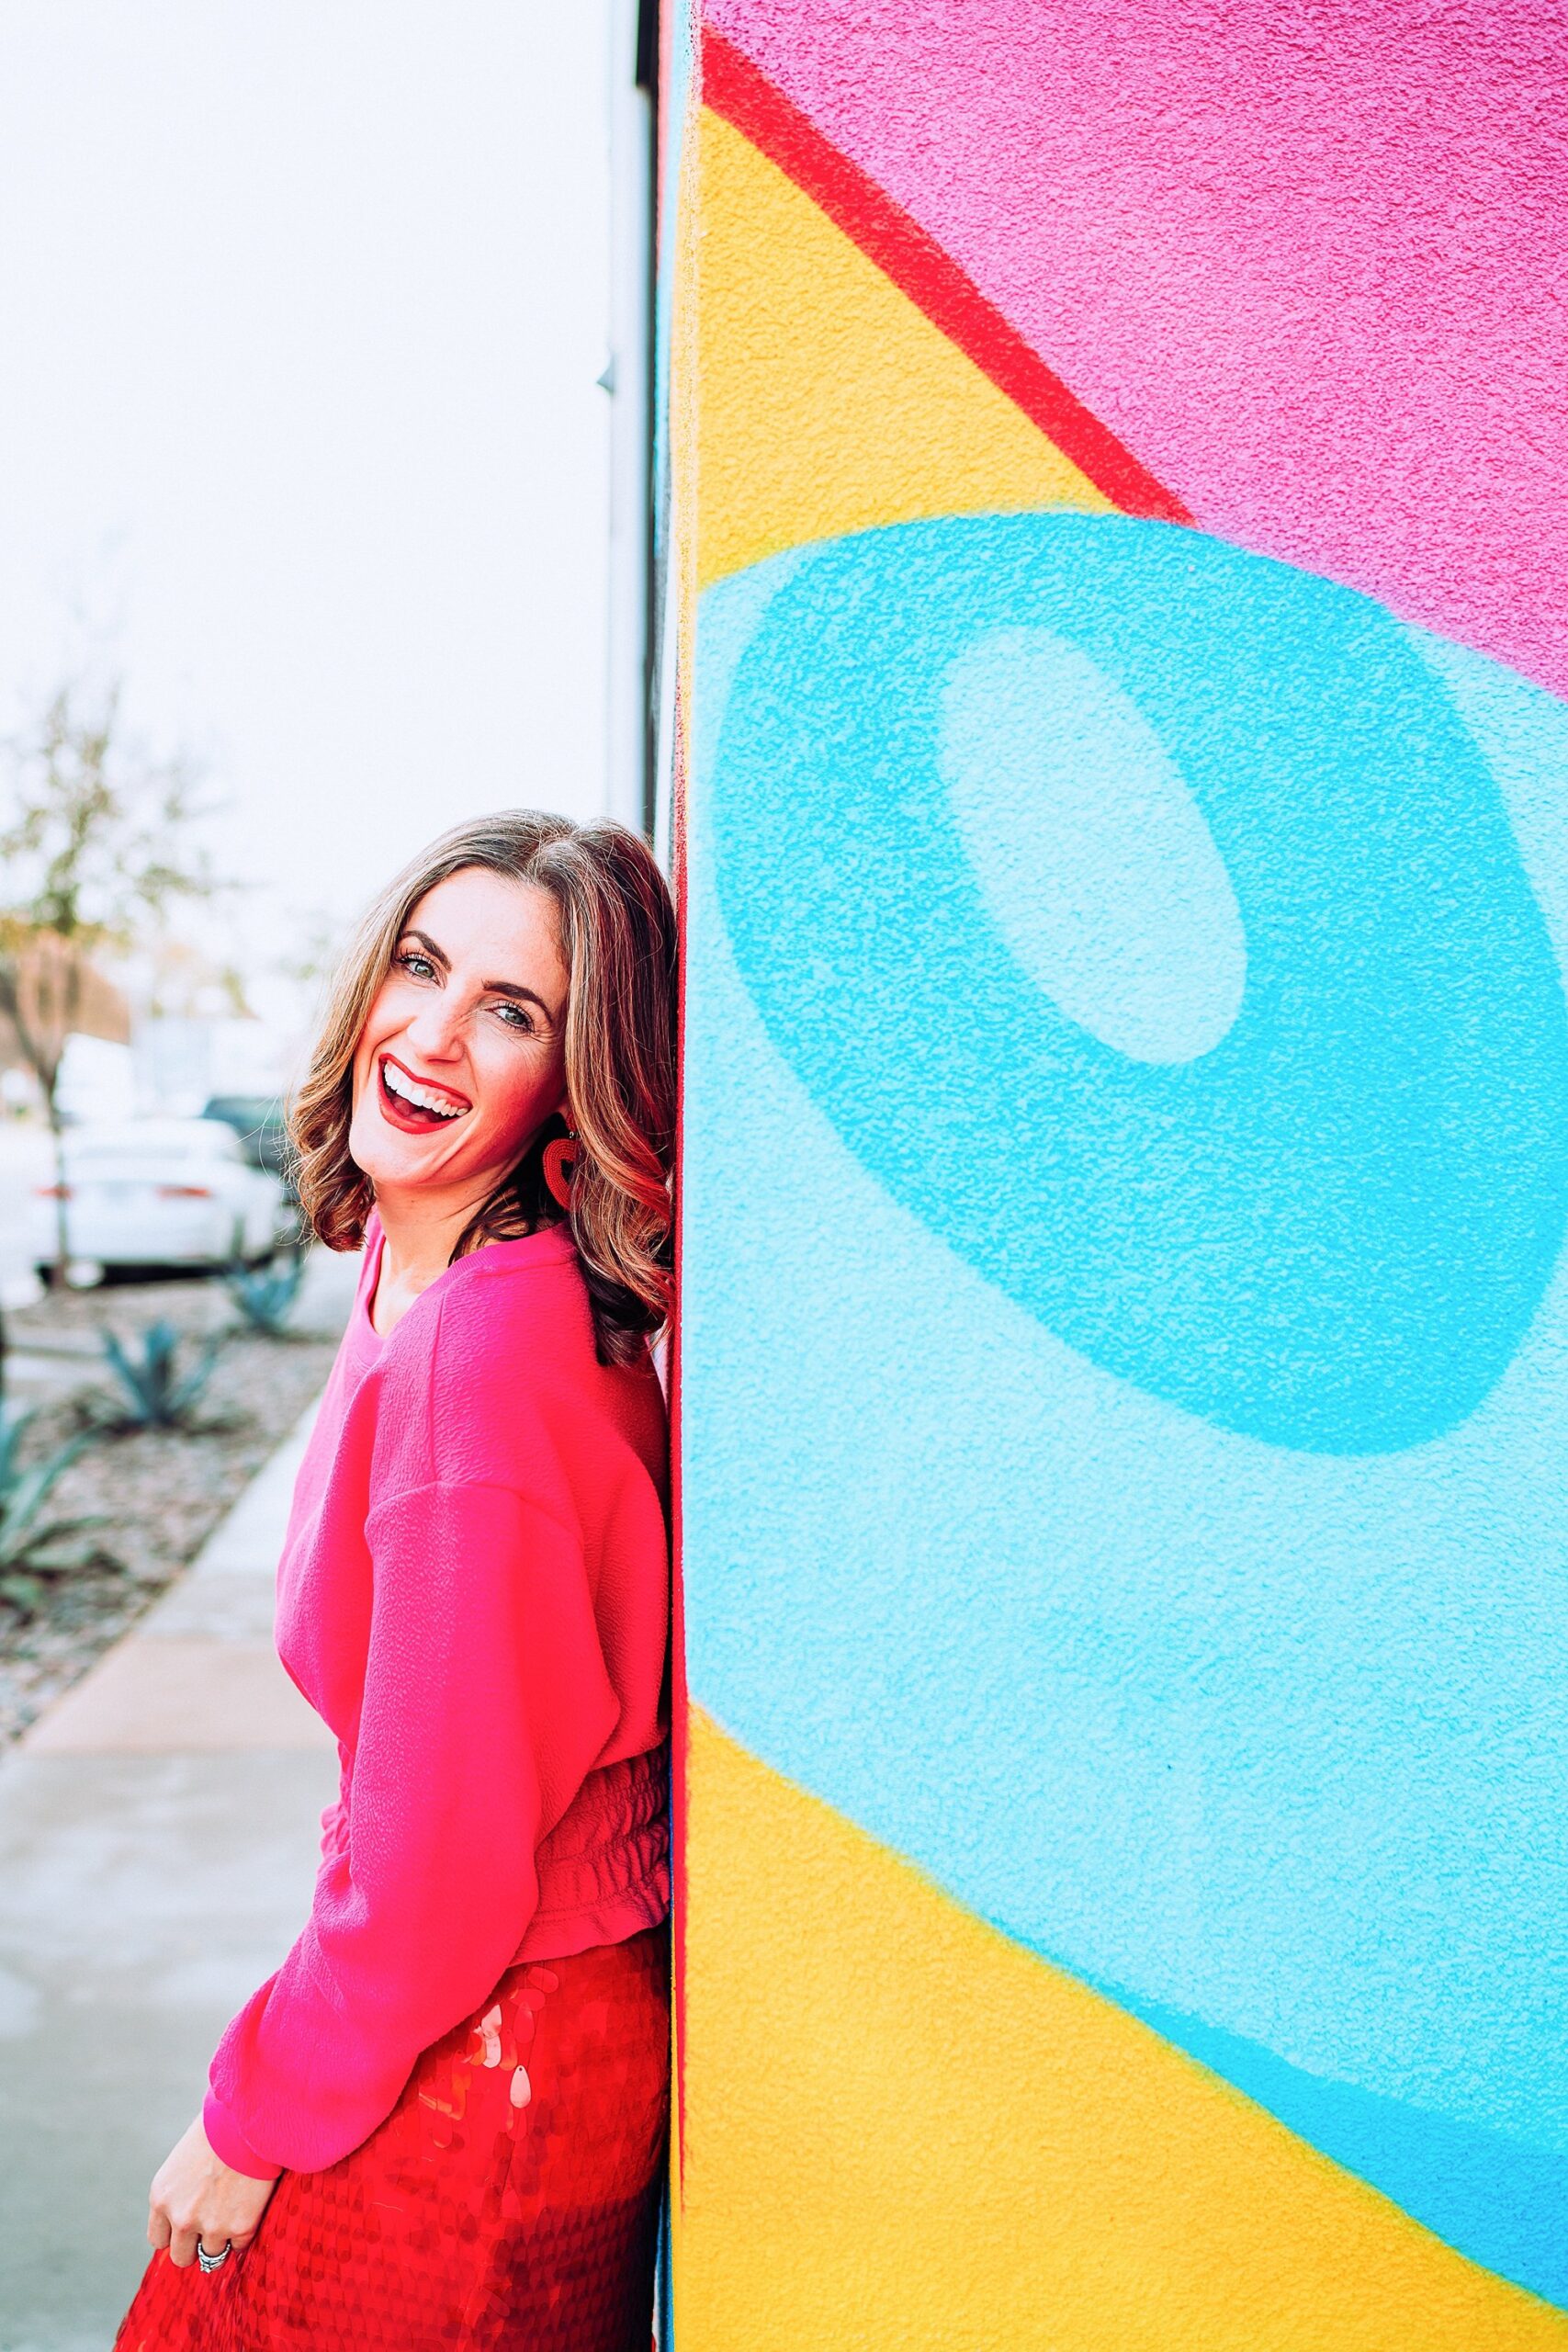 woman in red standing in front of a colorful wall